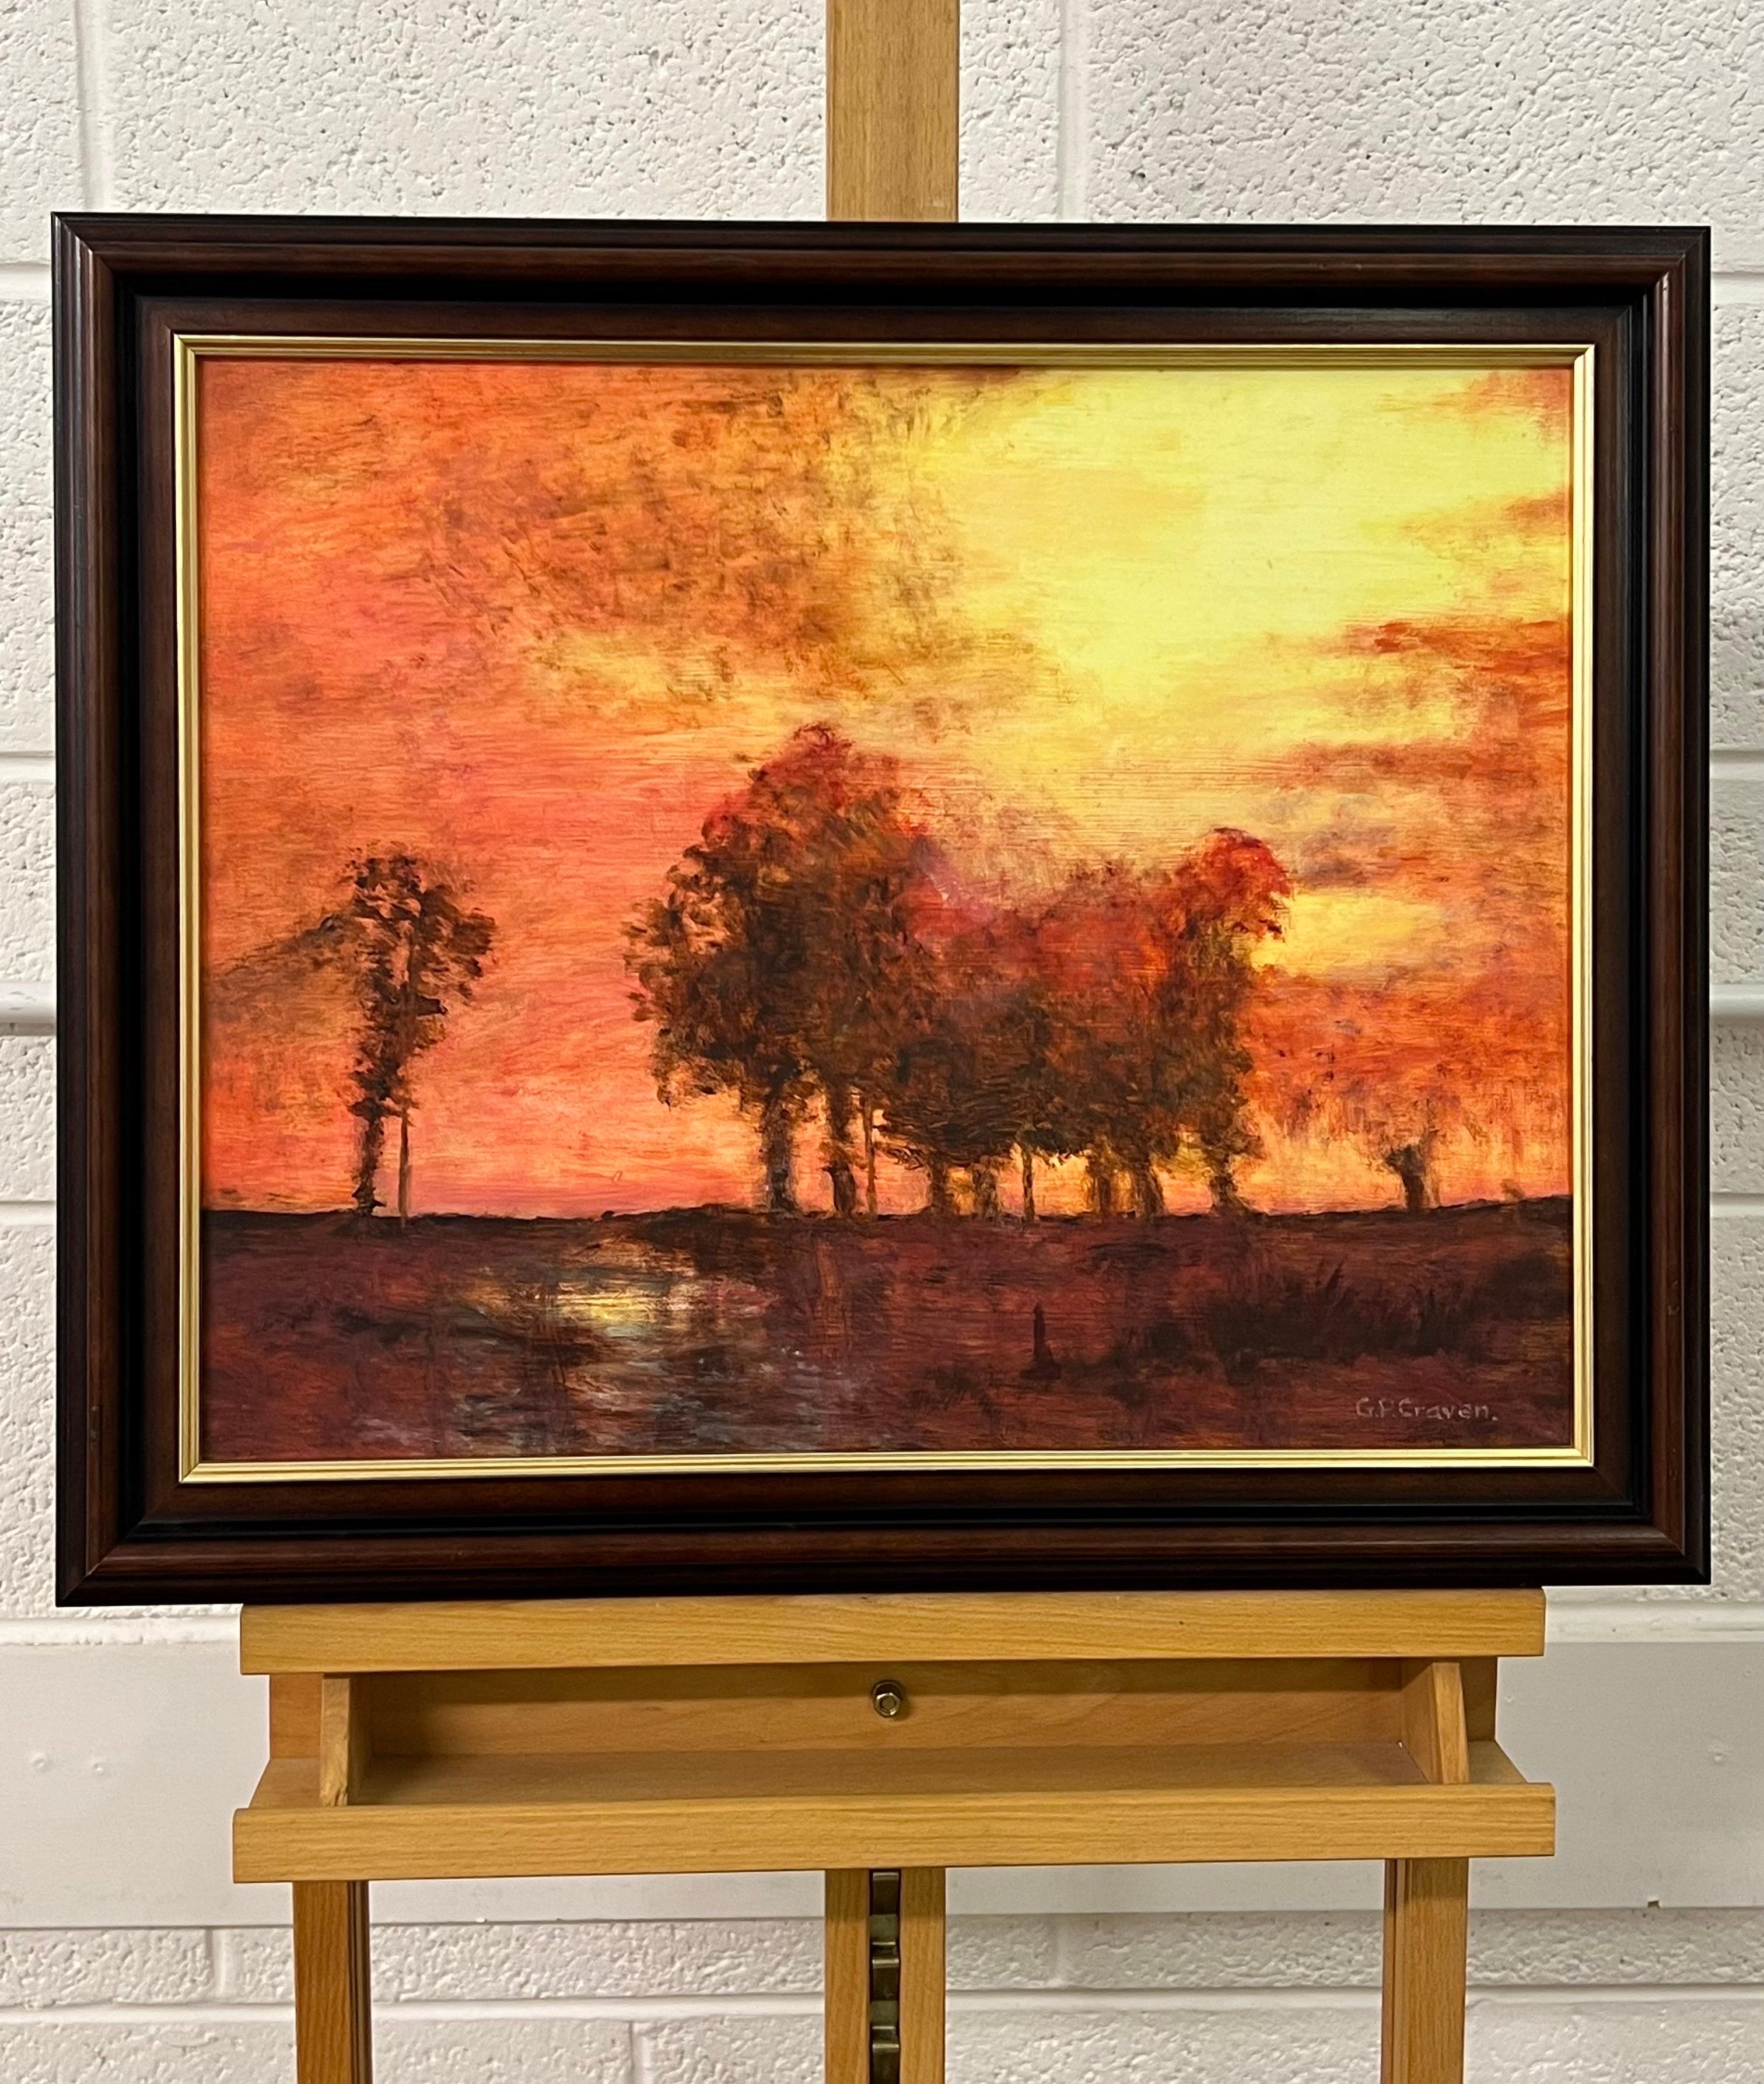 Tree Landscape Sunset with Oranges & Yellows by British Artist, Gabrielle Craven 
Mixed Media on Board 

Art measures 20 x 16 inches
Frame measures 24 x 20 inches
